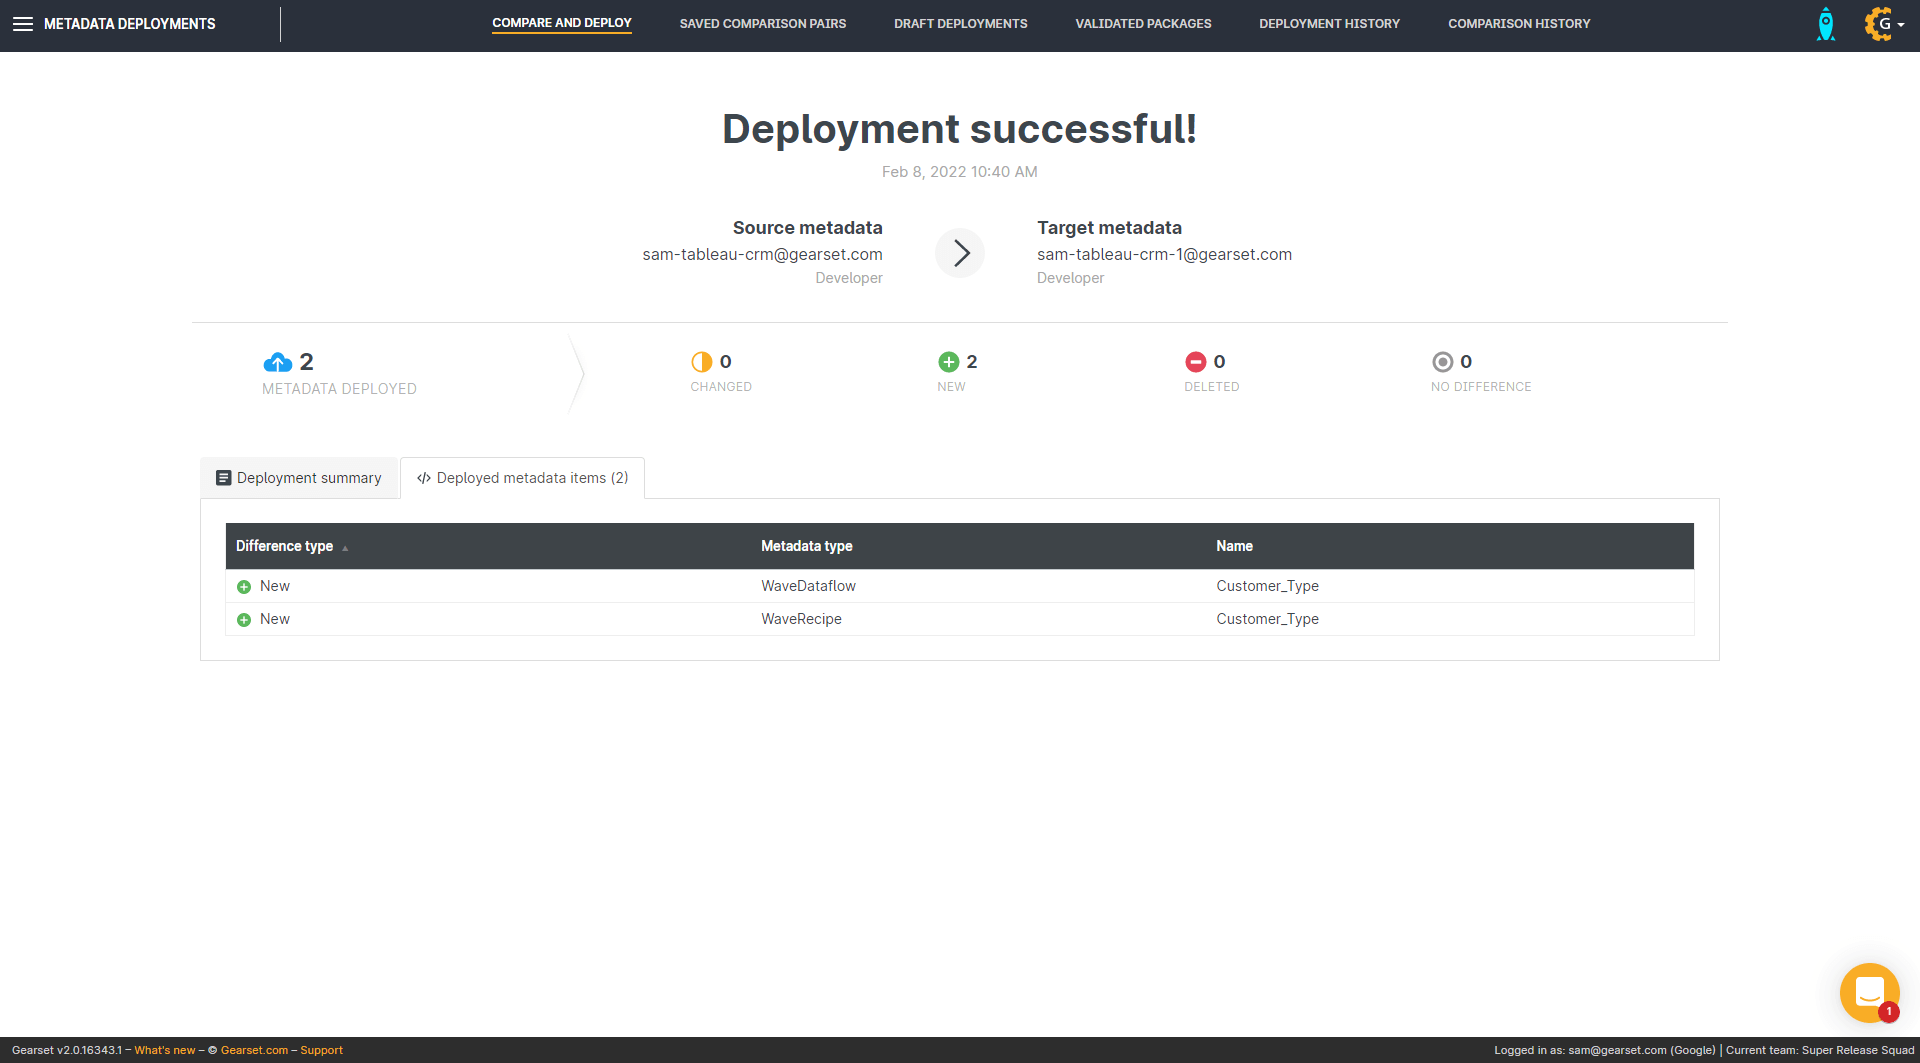 The deployment success page in Gearset